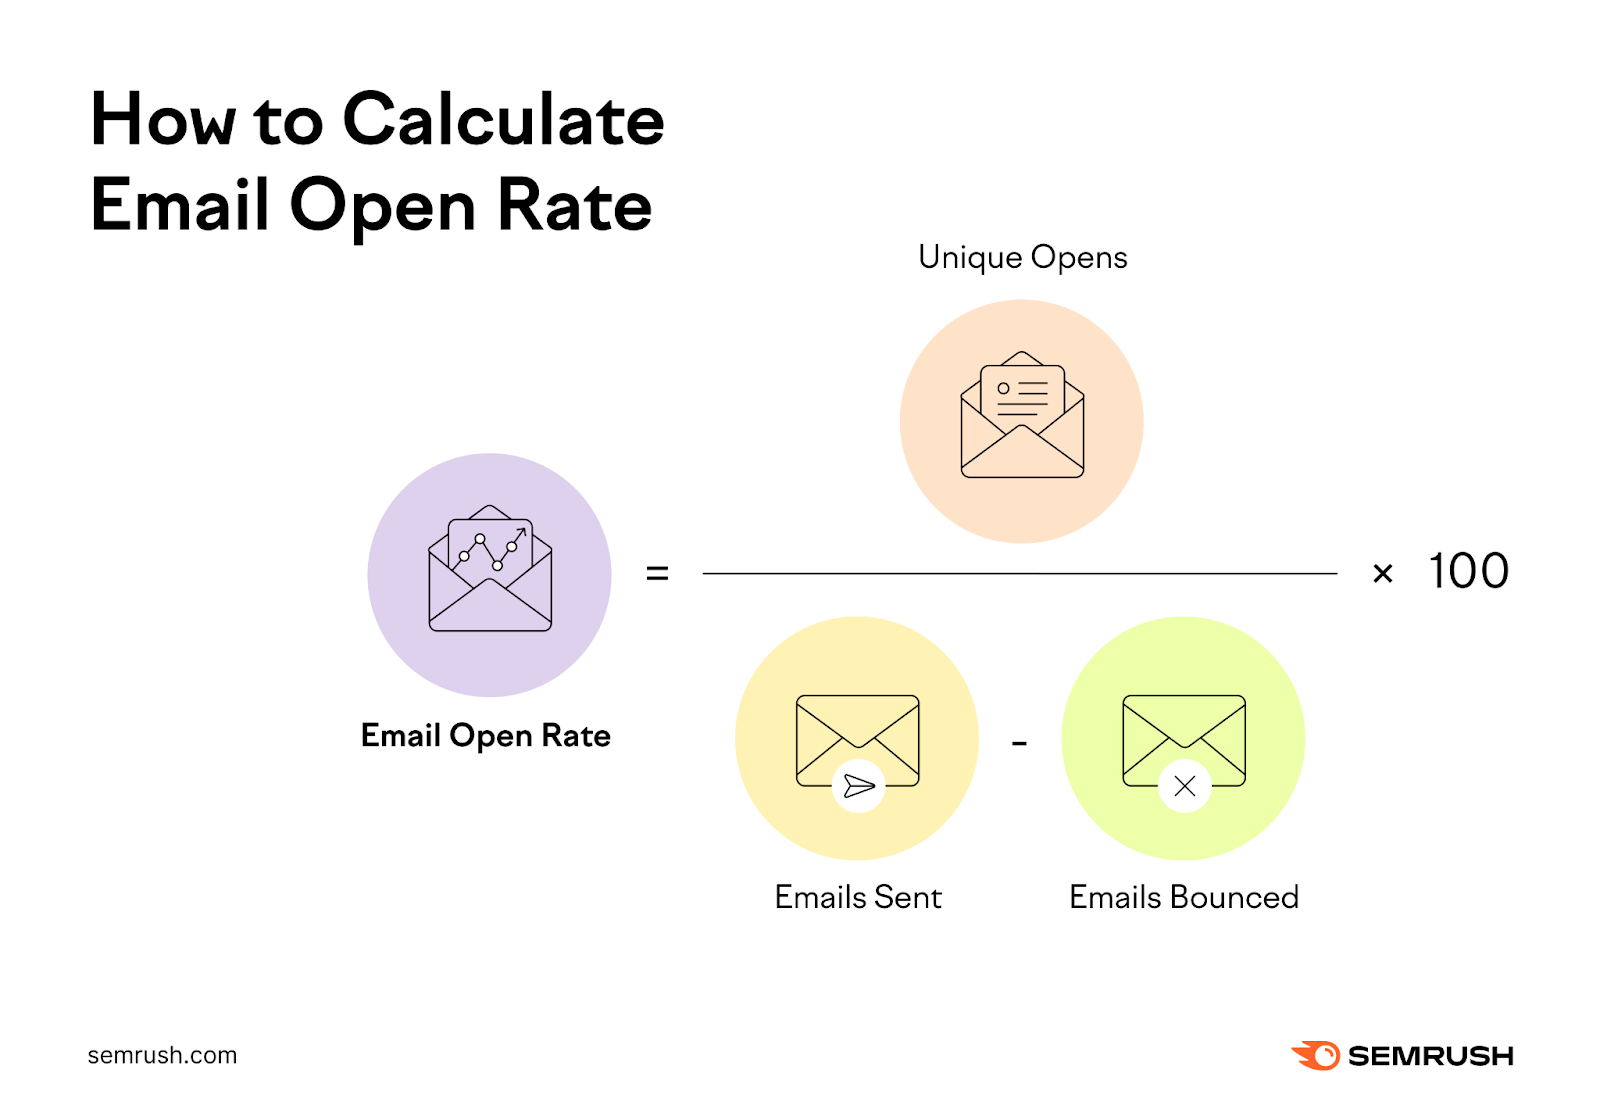 Email open rate equals unique opens divided by the total of emails sent minus the number of emails bounced. Then multiply the total by 100.